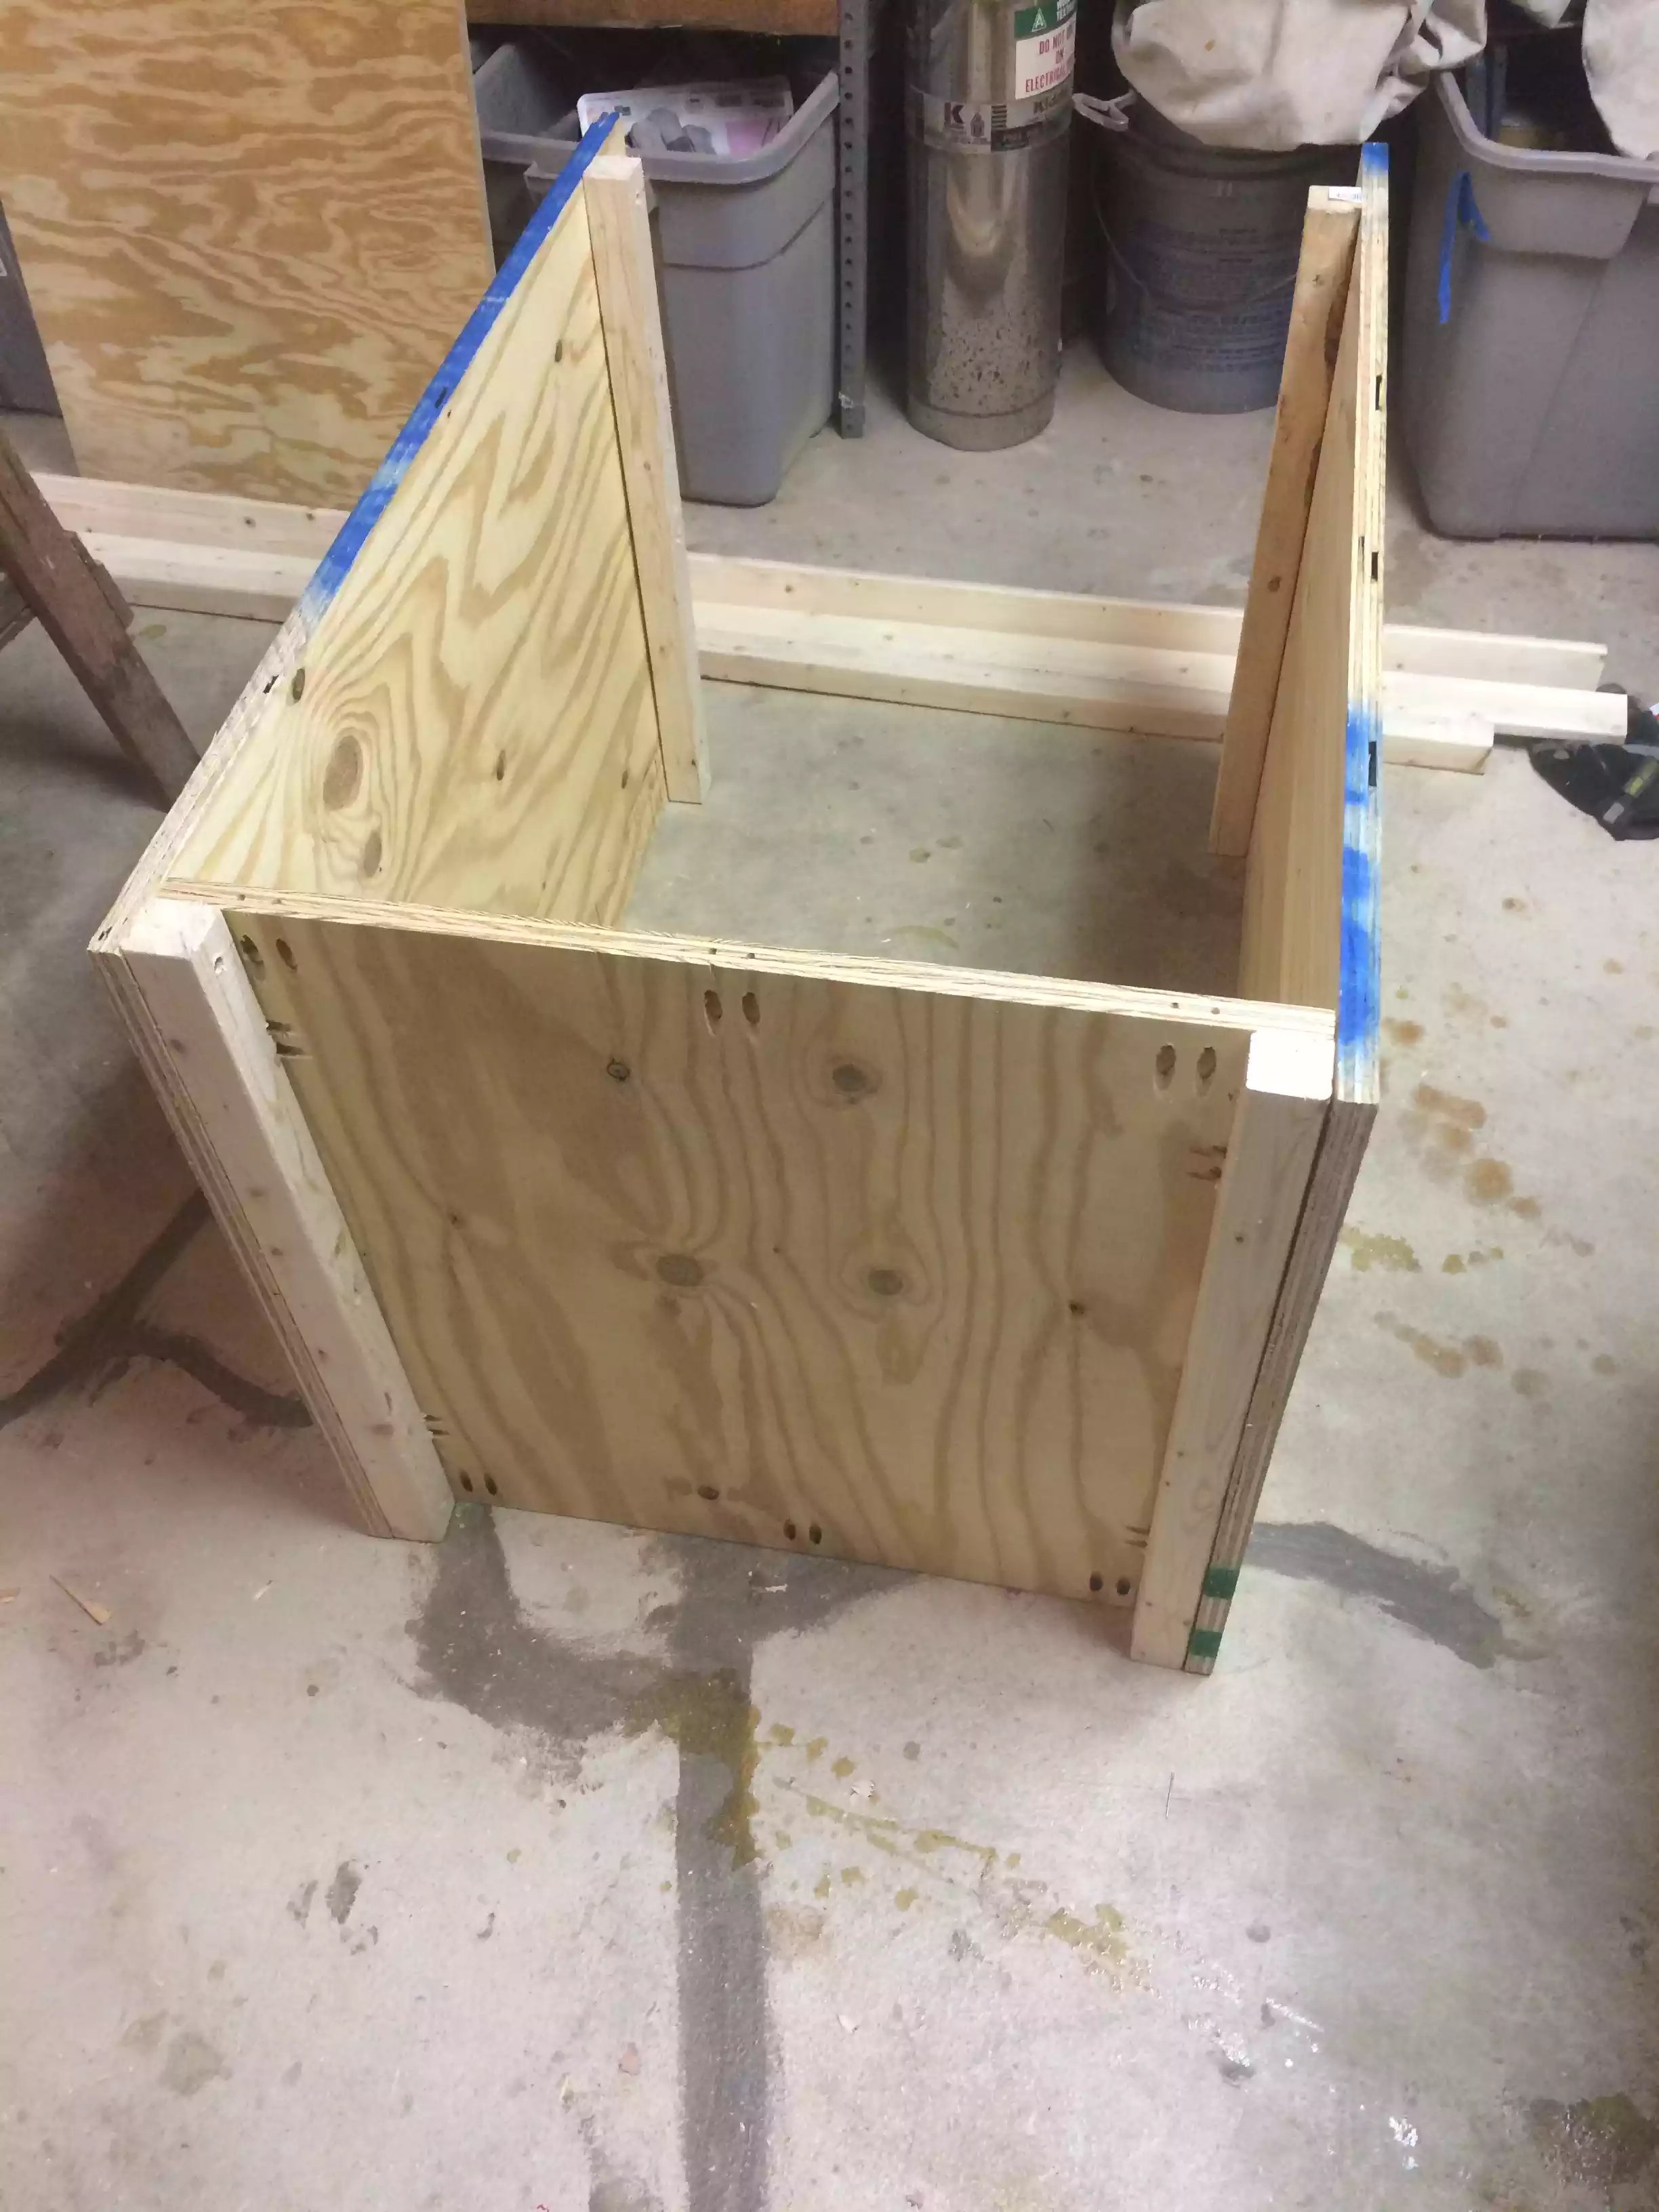 Building the box